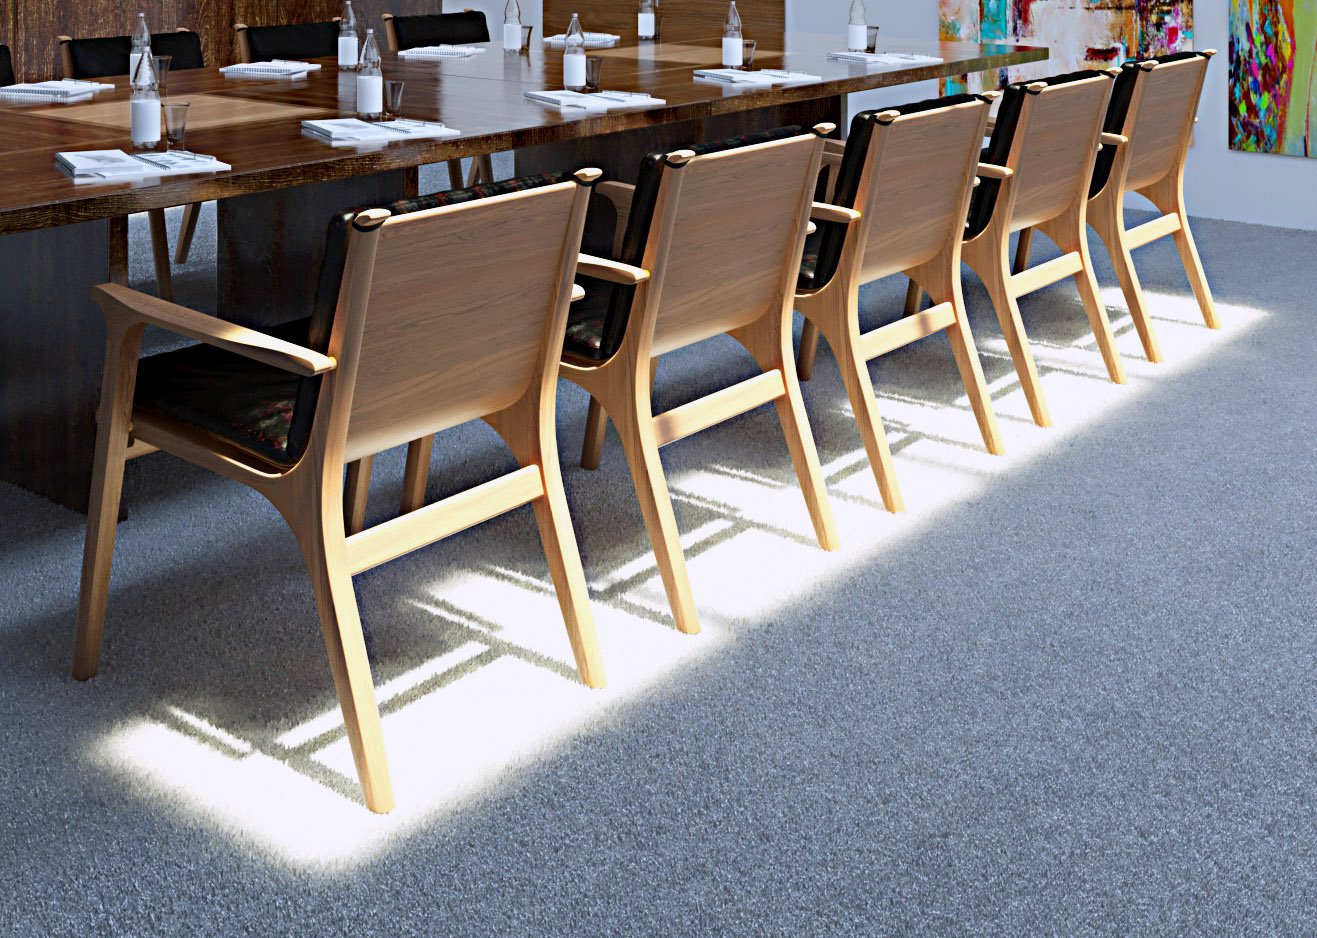 Innerscene Virtual Sun installation case study at Apple Campus in Cupertino California sun rays on dark wood desk and chairs